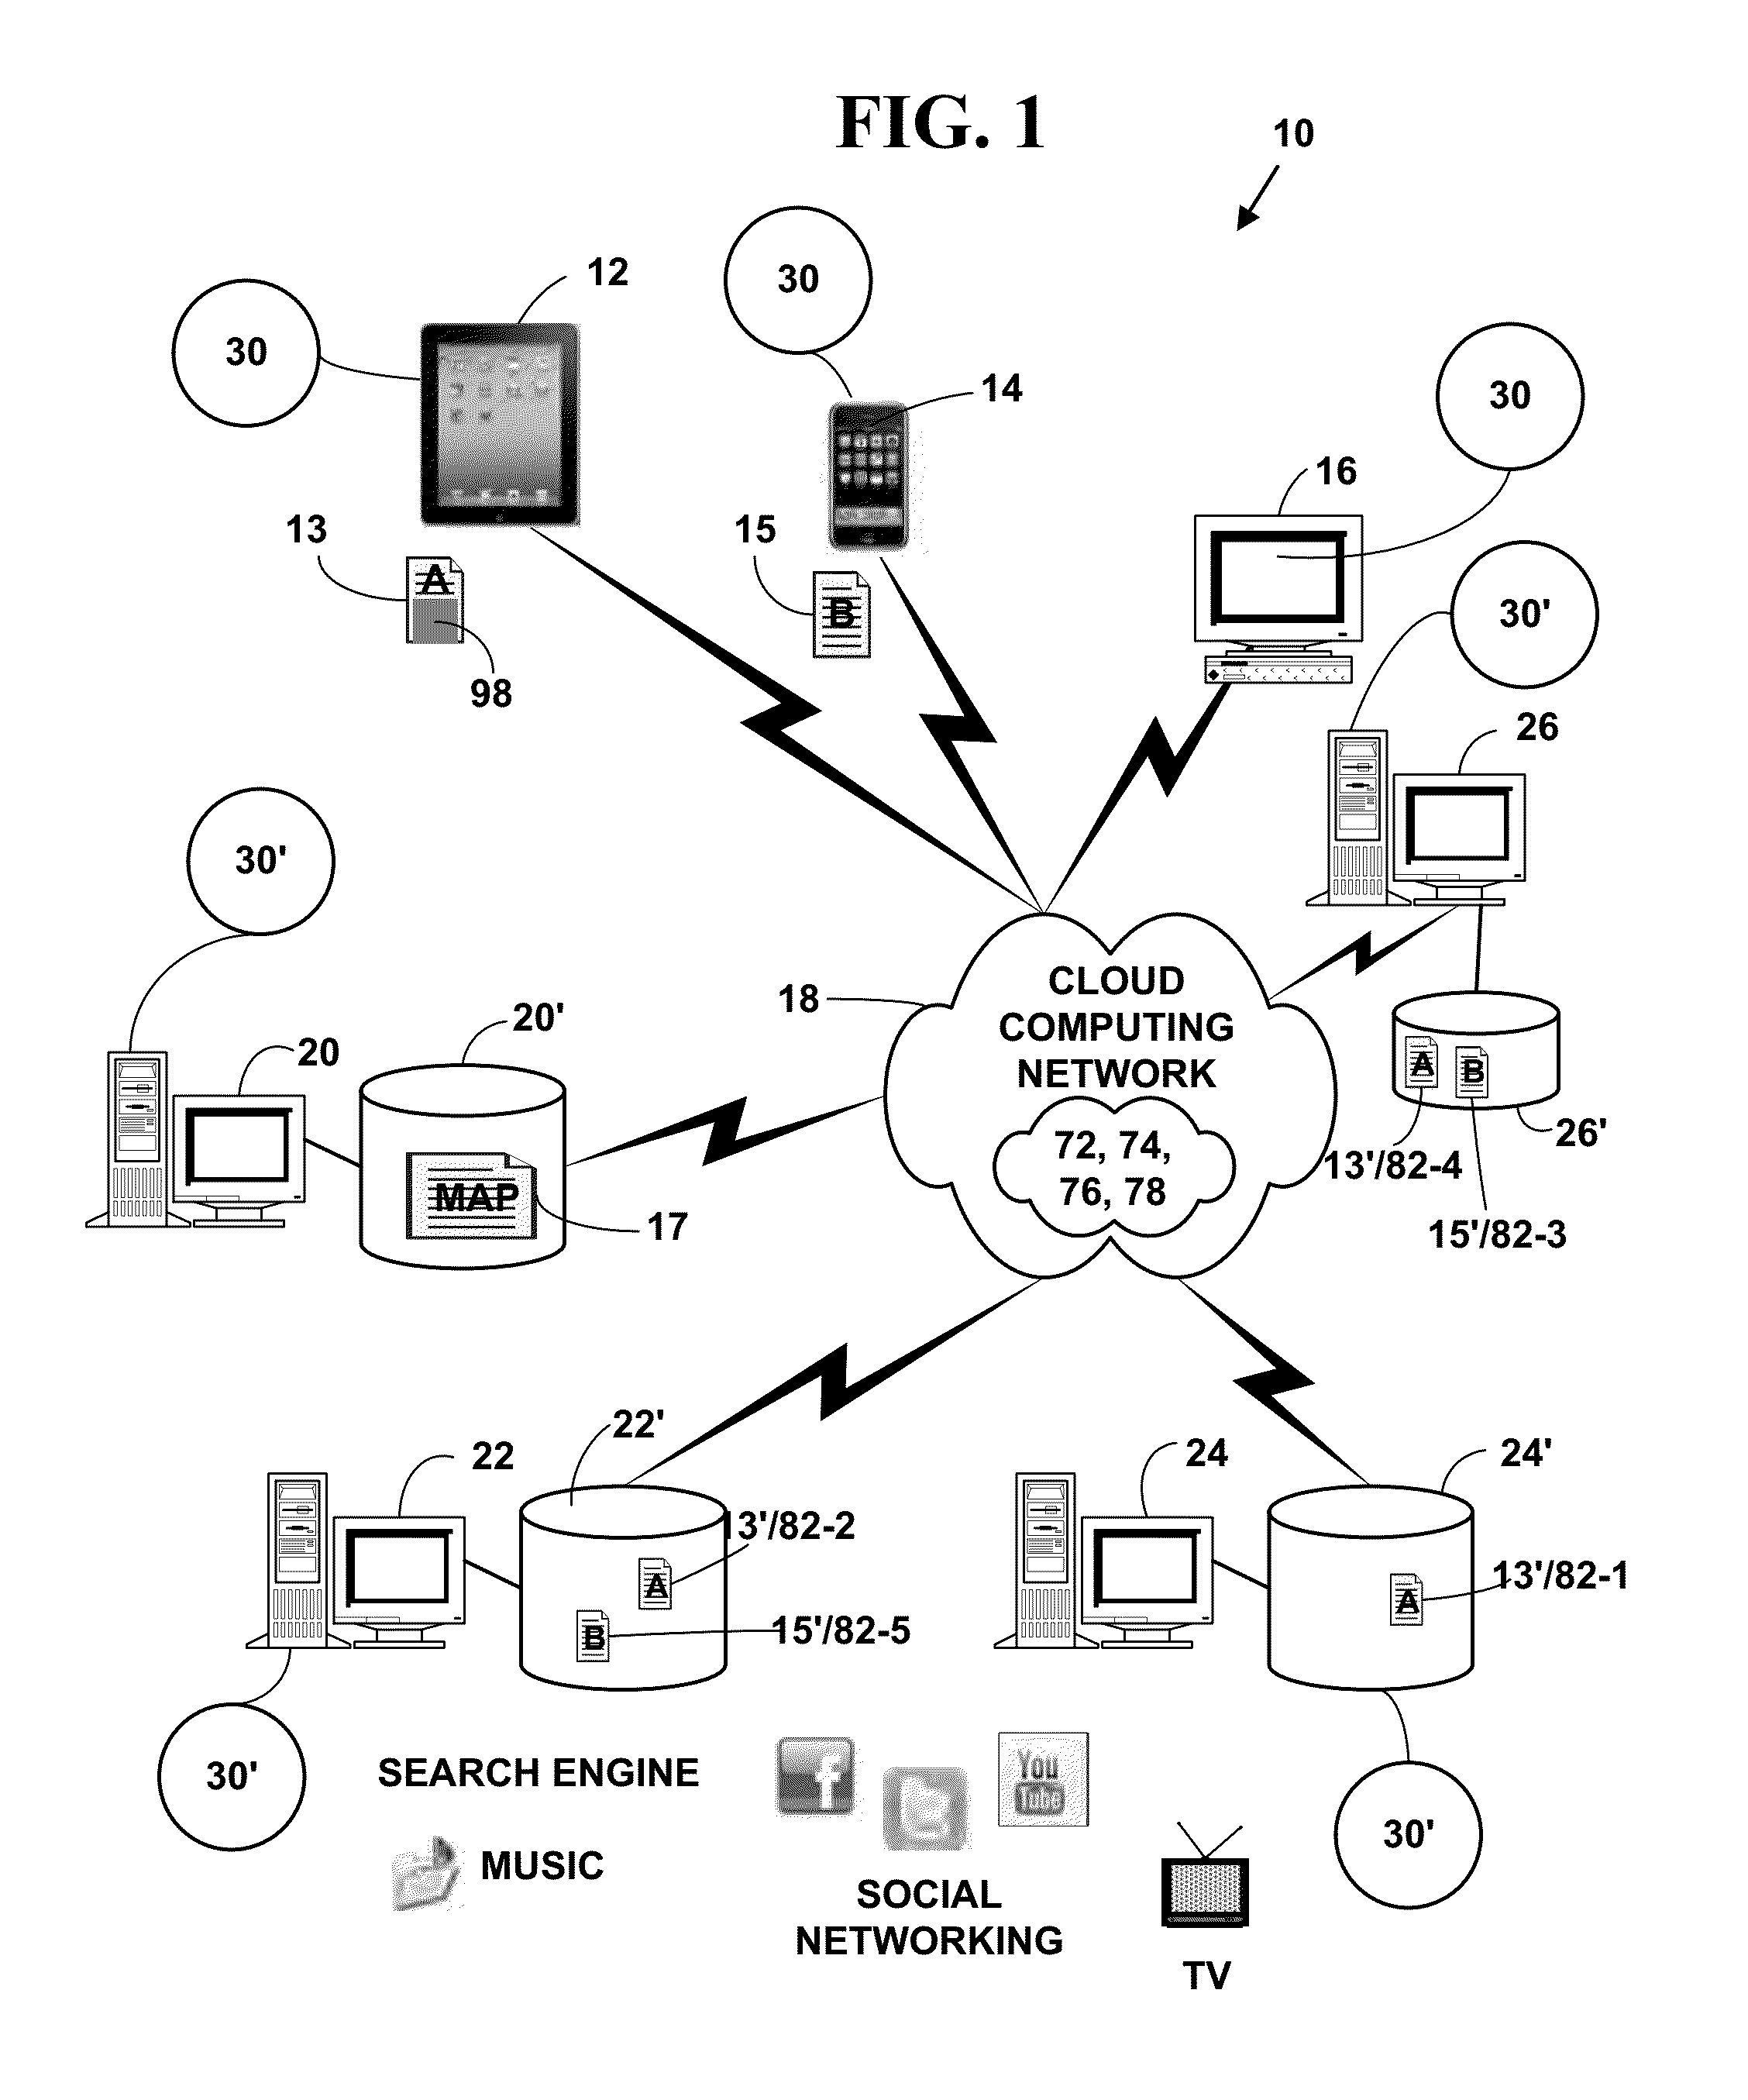 Method and system for electronic content storage and retrieval using galois fields and geometric shapes on cloud computing networks